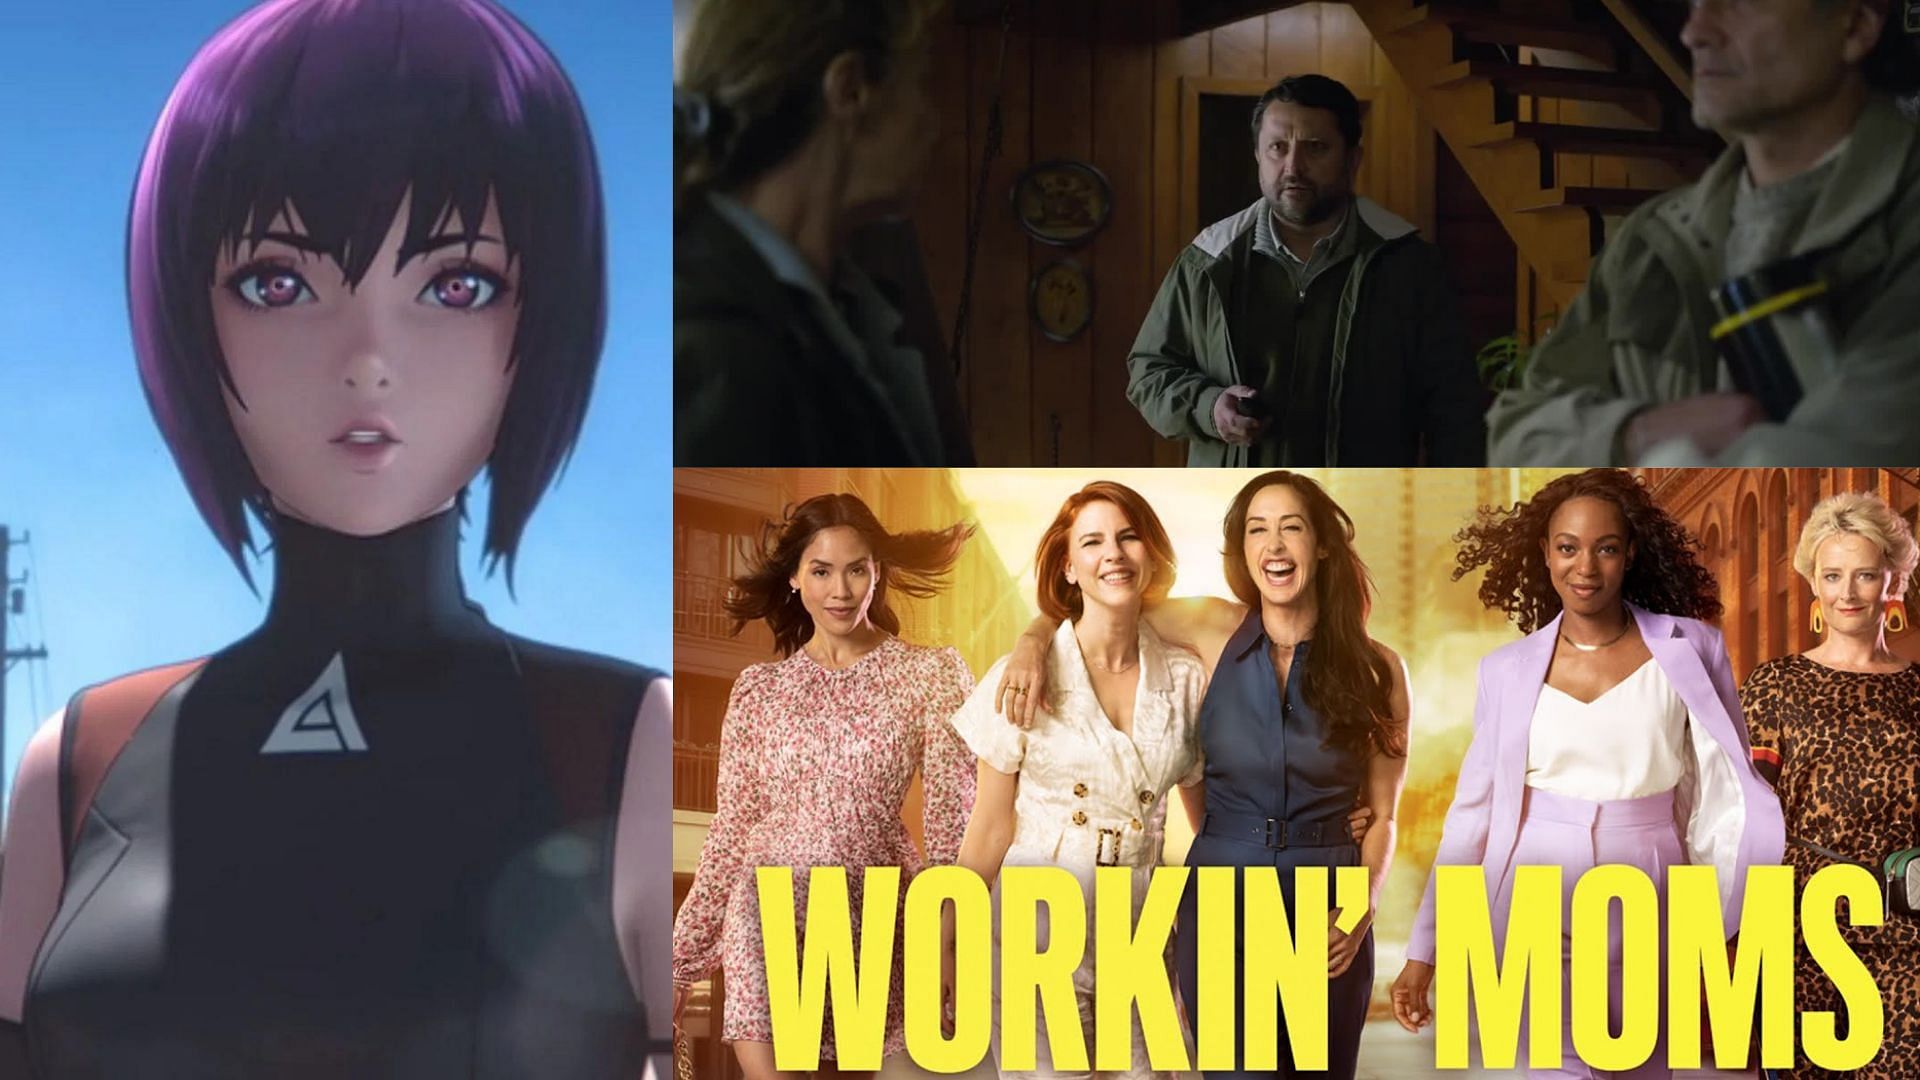 Ghost in the Shell: SAC_2045 Sustainable War, Workin&#039; Moms Season 6 and 42 Days of Darkness, arriving on Netflix this May 2022 (Image Sportskeeda/YouTube/IMDb)